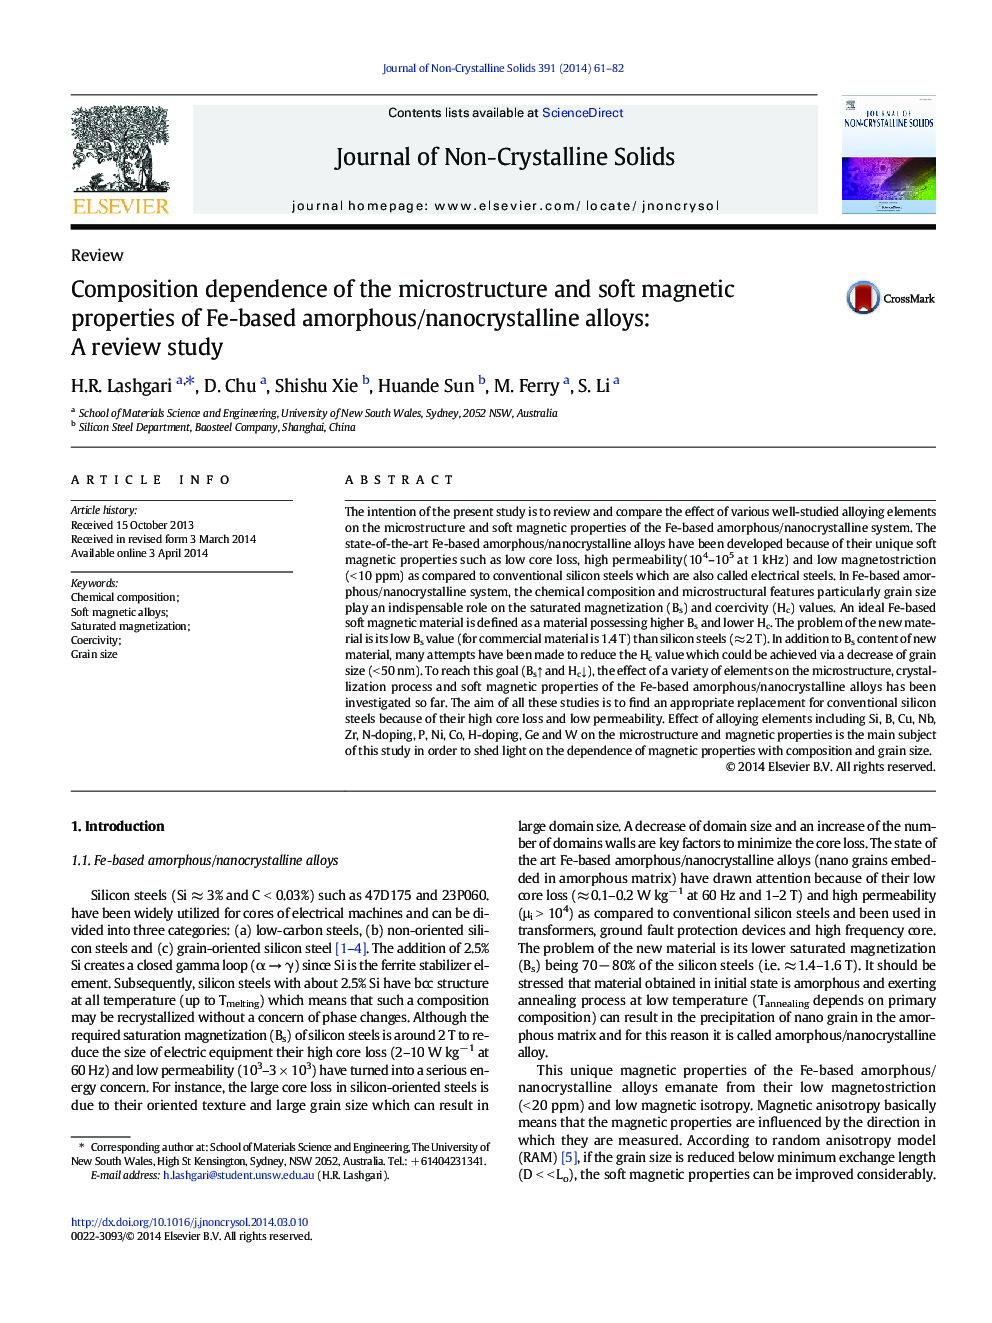 Composition dependence of the microstructure and soft magnetic properties of Fe-based amorphous/nanocrystalline alloys: A review study